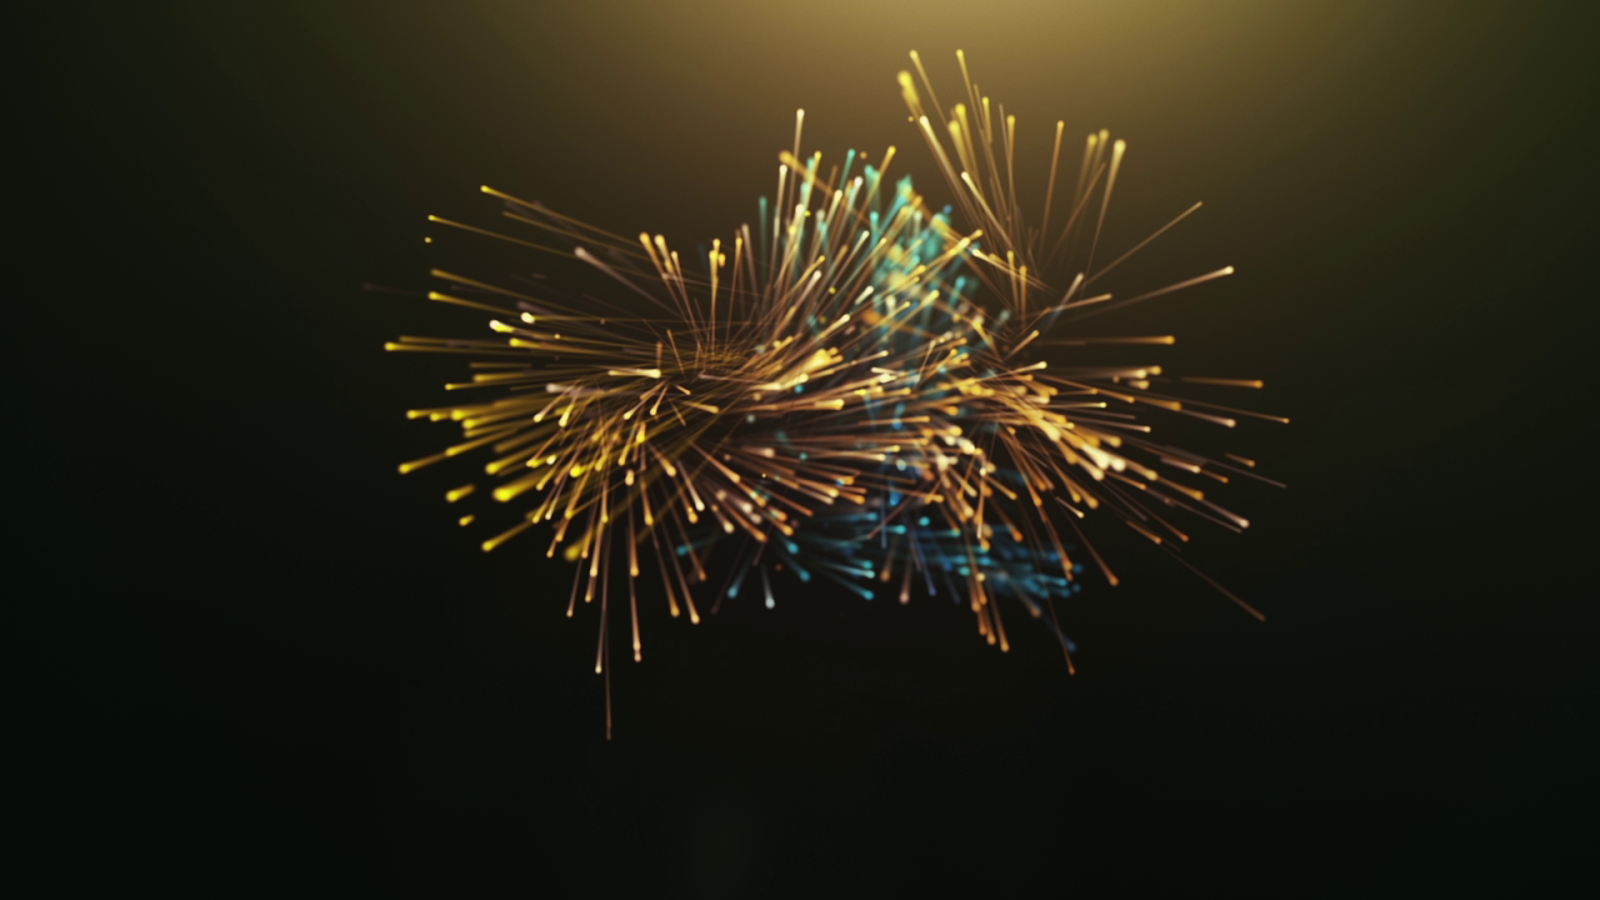 Advanced Particles Intro After Effects template free ...